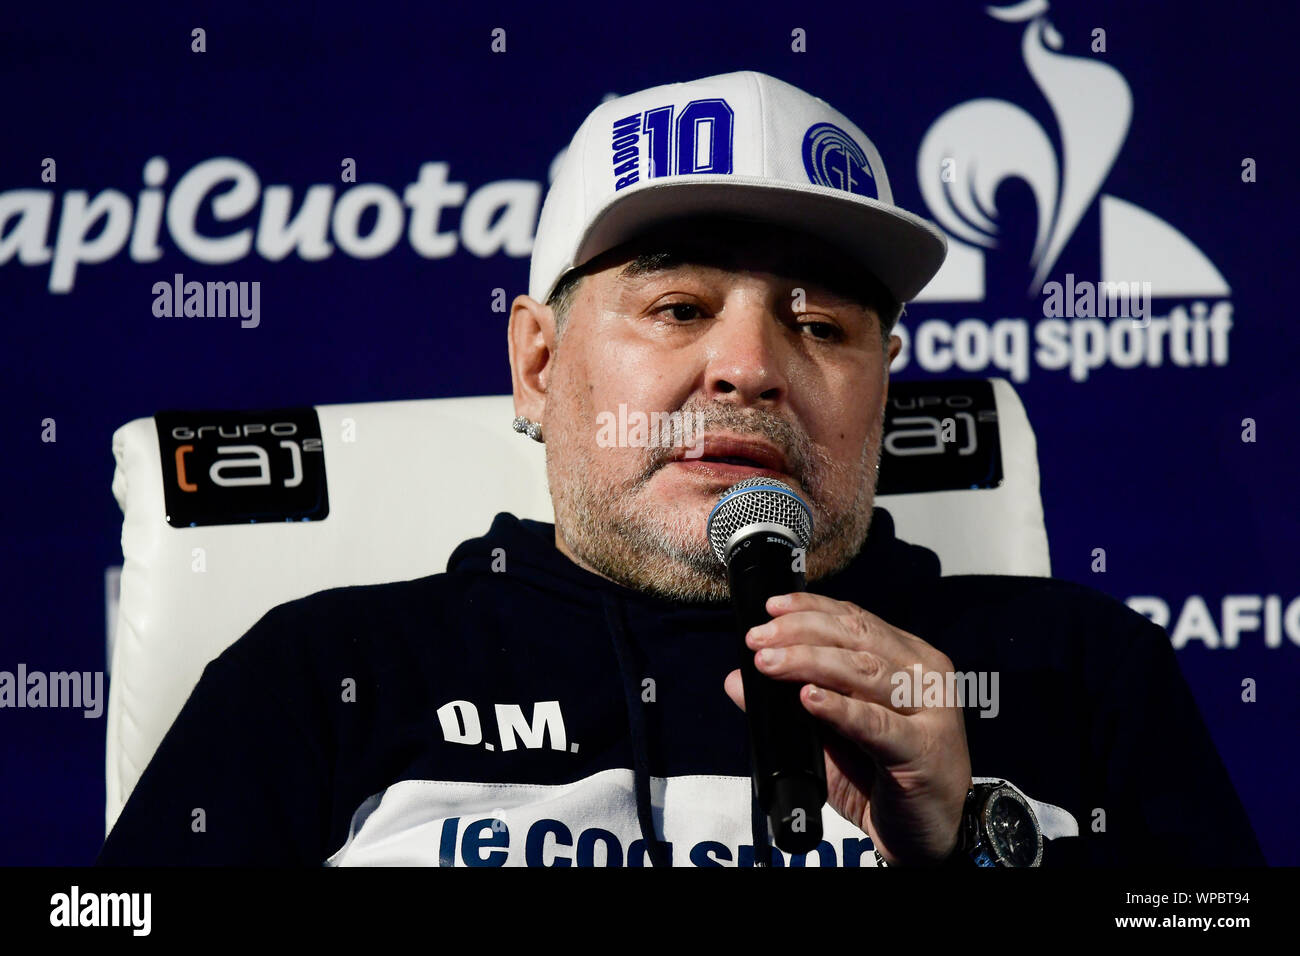 La Plata, Argentina. 08th Sep, 2019. Former soccer player Diego Maradona speaks on stage during his first training session at the Gimnasia y Esgrima football club from La Plata, 60 kilometres south of the capital. Credit: Gustavo Ortiz/dpa/Alamy Live News Stock Photo